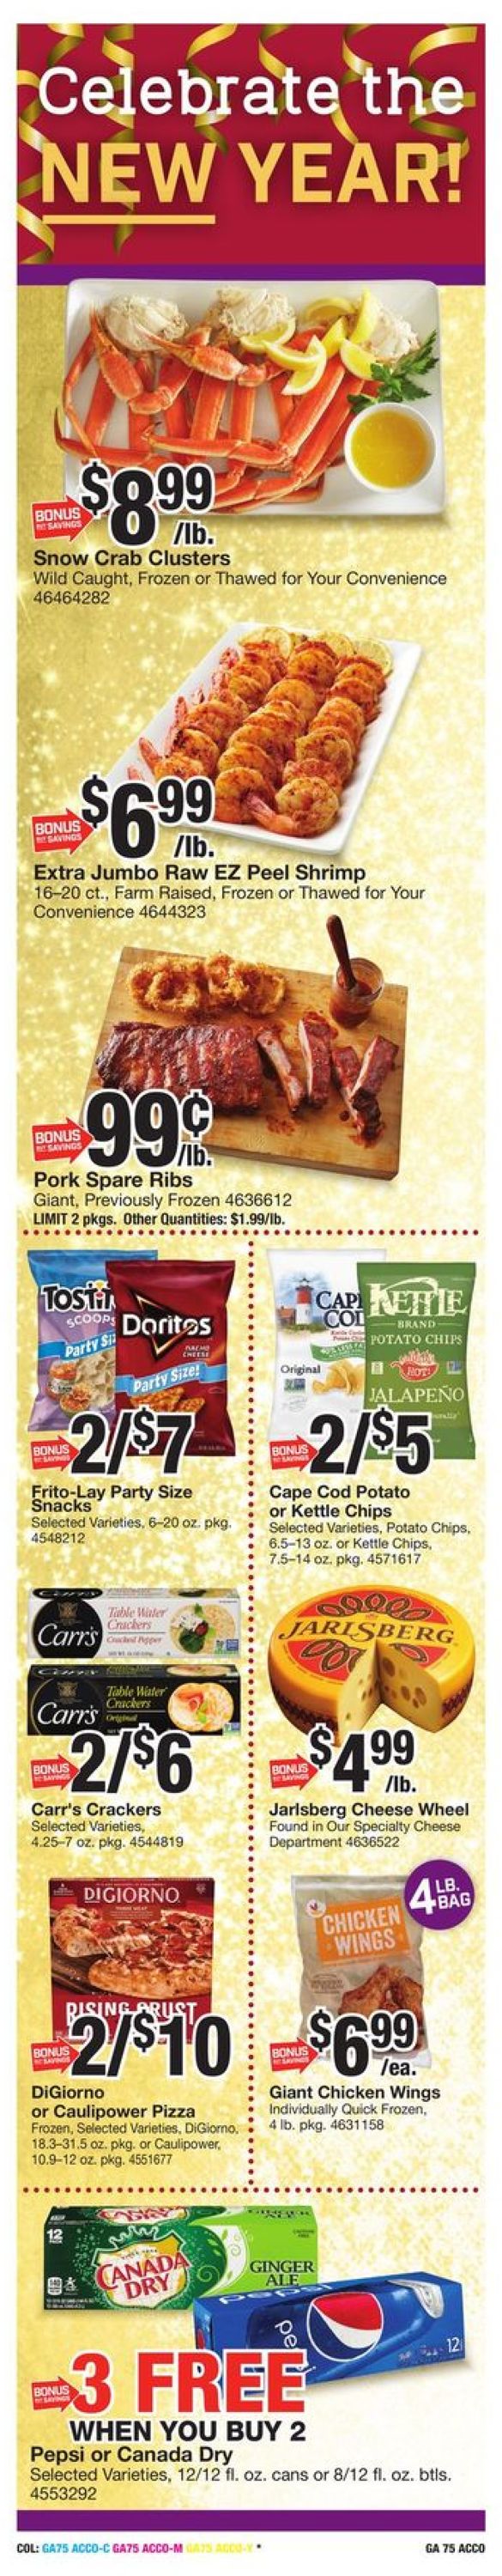 Giant Food Ad from 12/26/2020